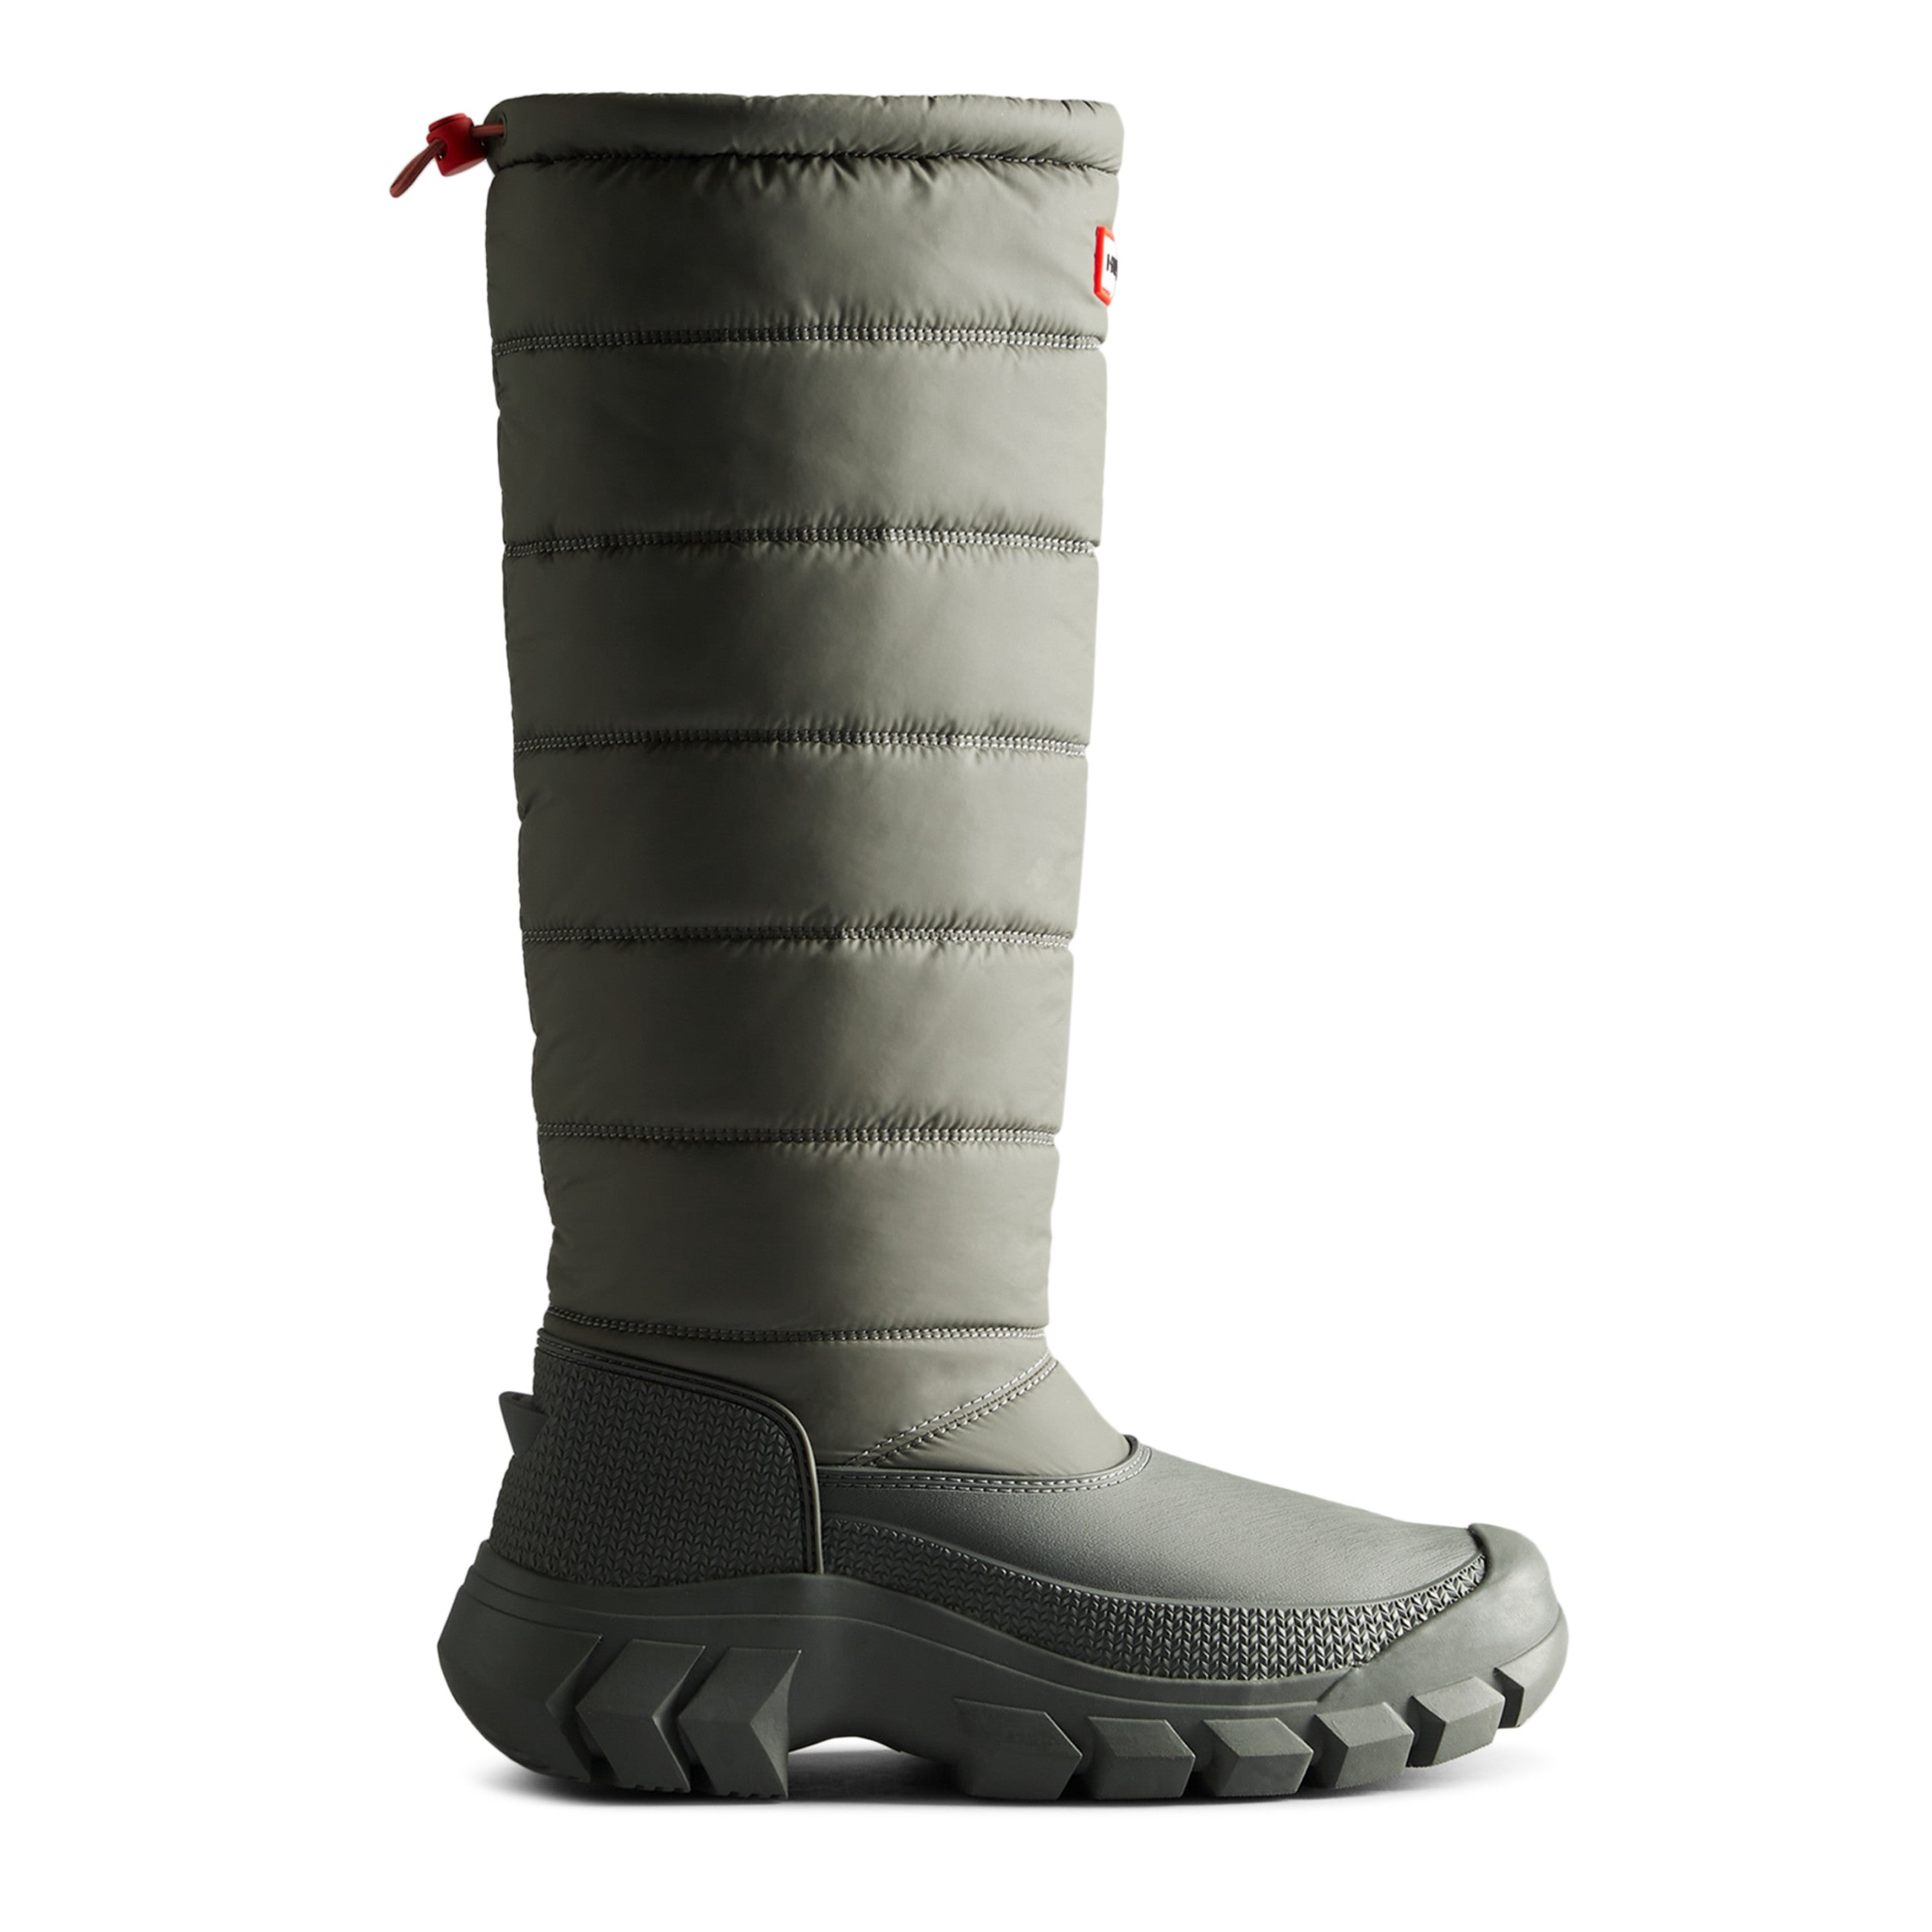 Women's Intrepid Insulated Tall Snow Boots